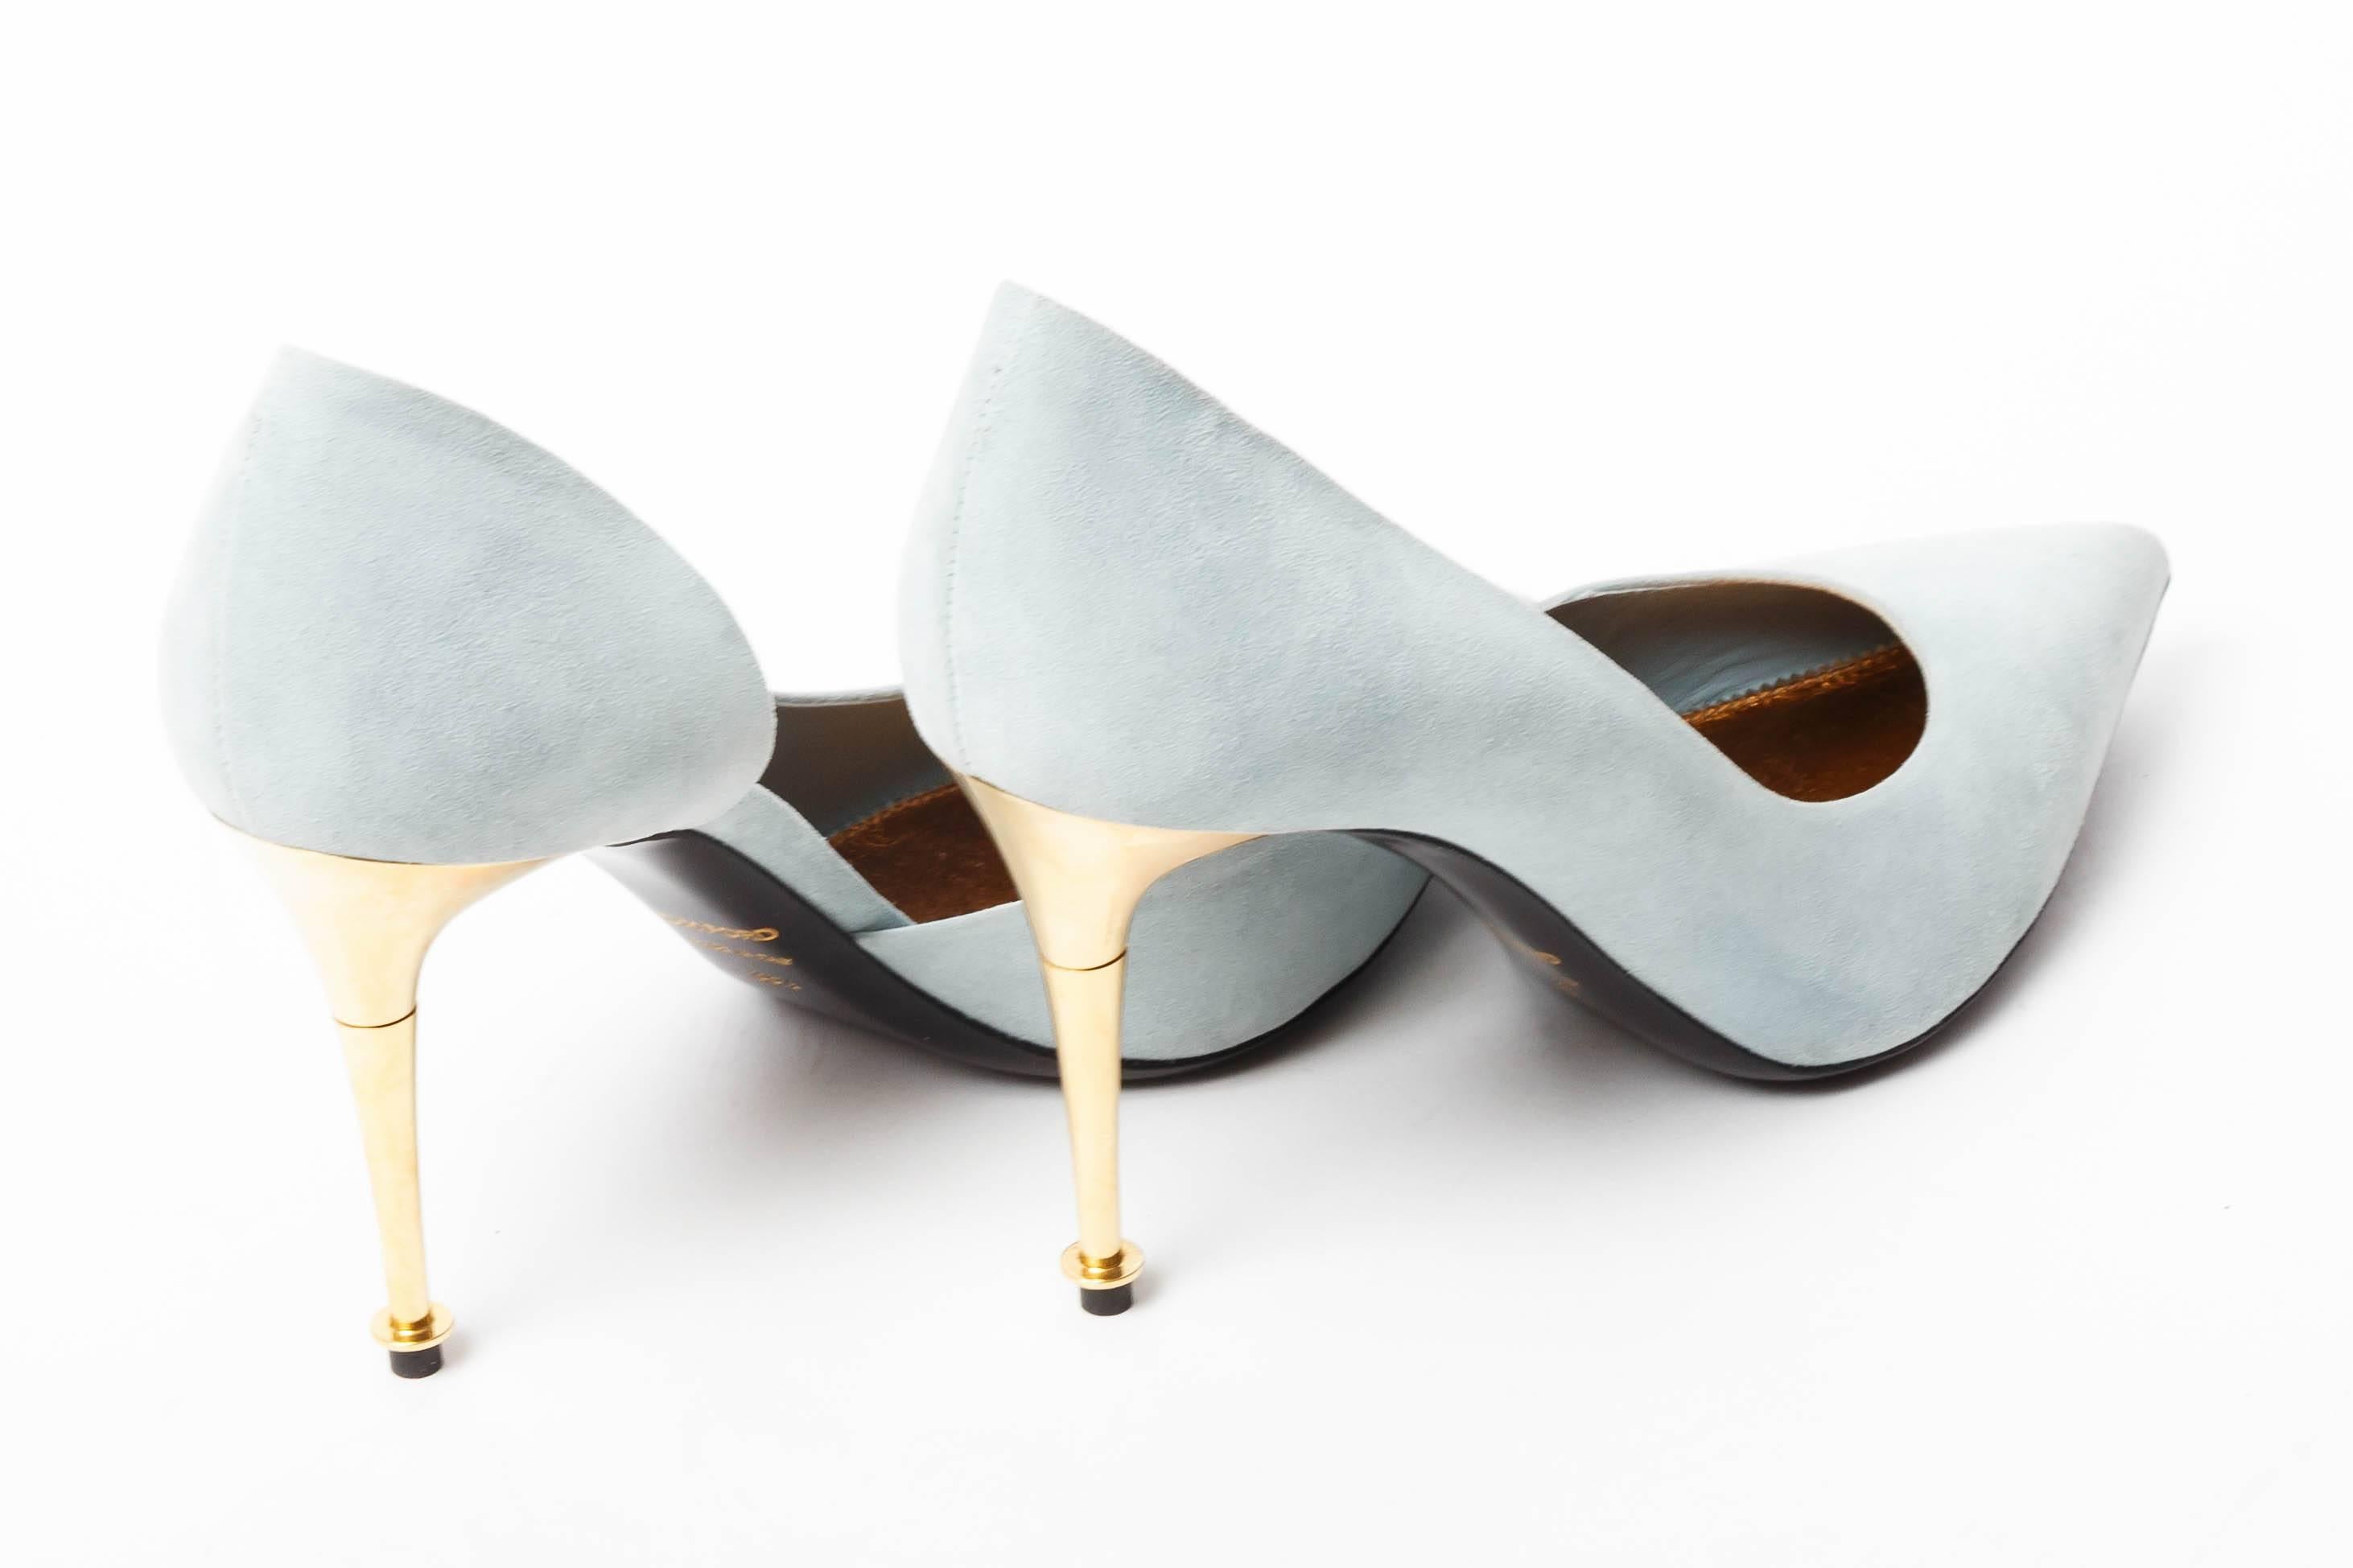 Women's Tom Ford Powder Blue Suede Pumps With Spike Heel - New With Box - 38.5 / 8.5